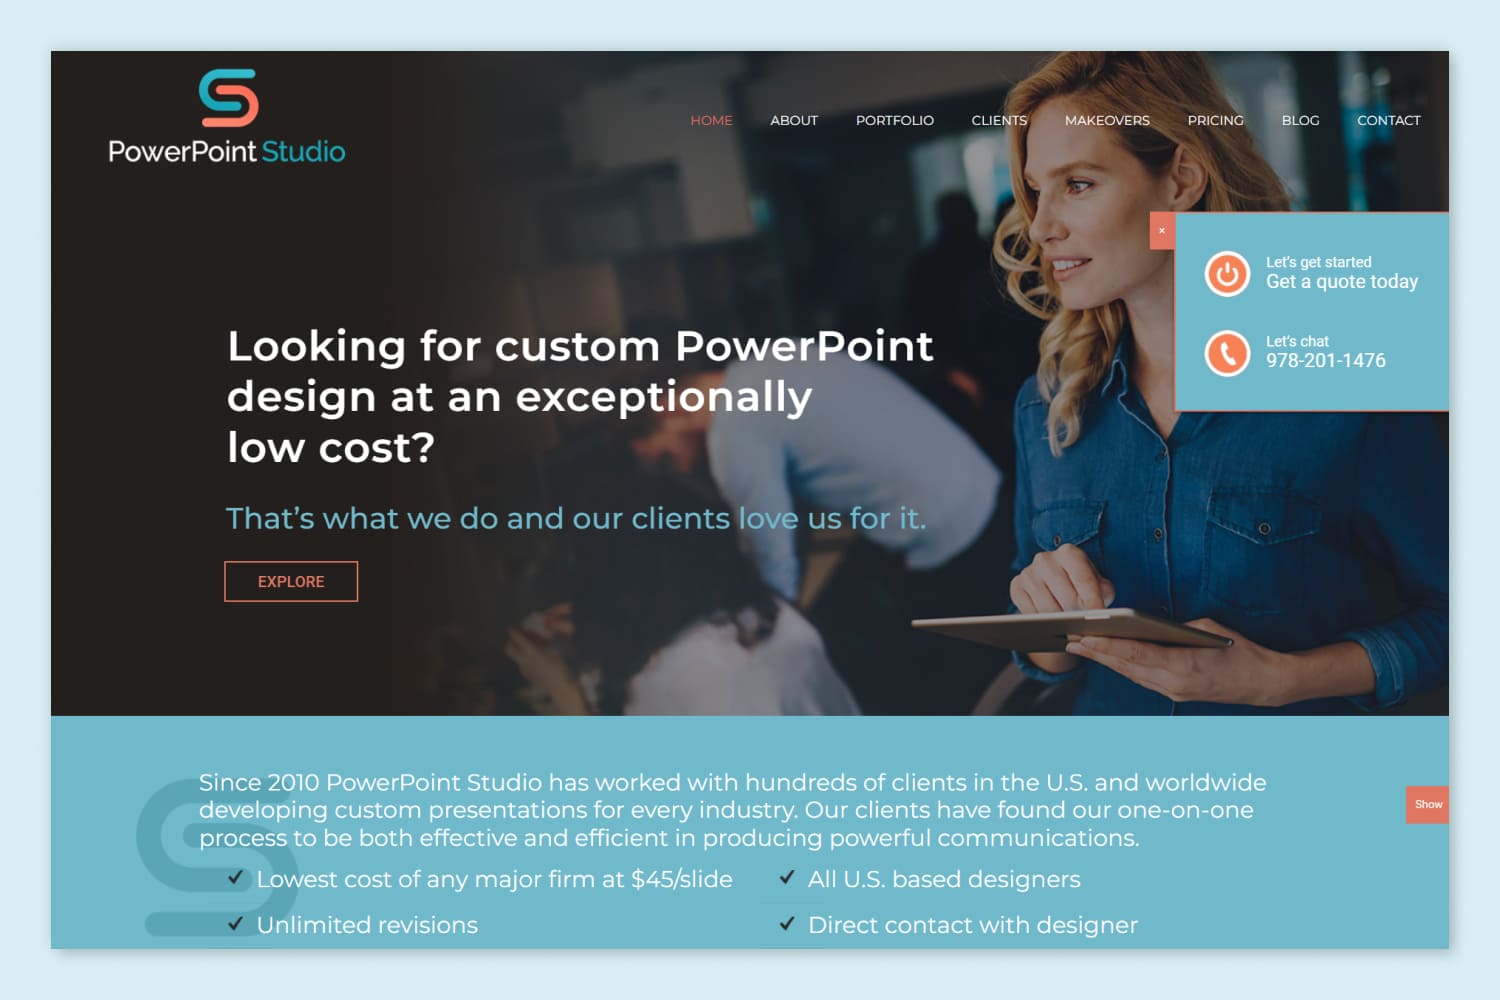 Screenshot of the main page of the site The PowerPoint Studio.